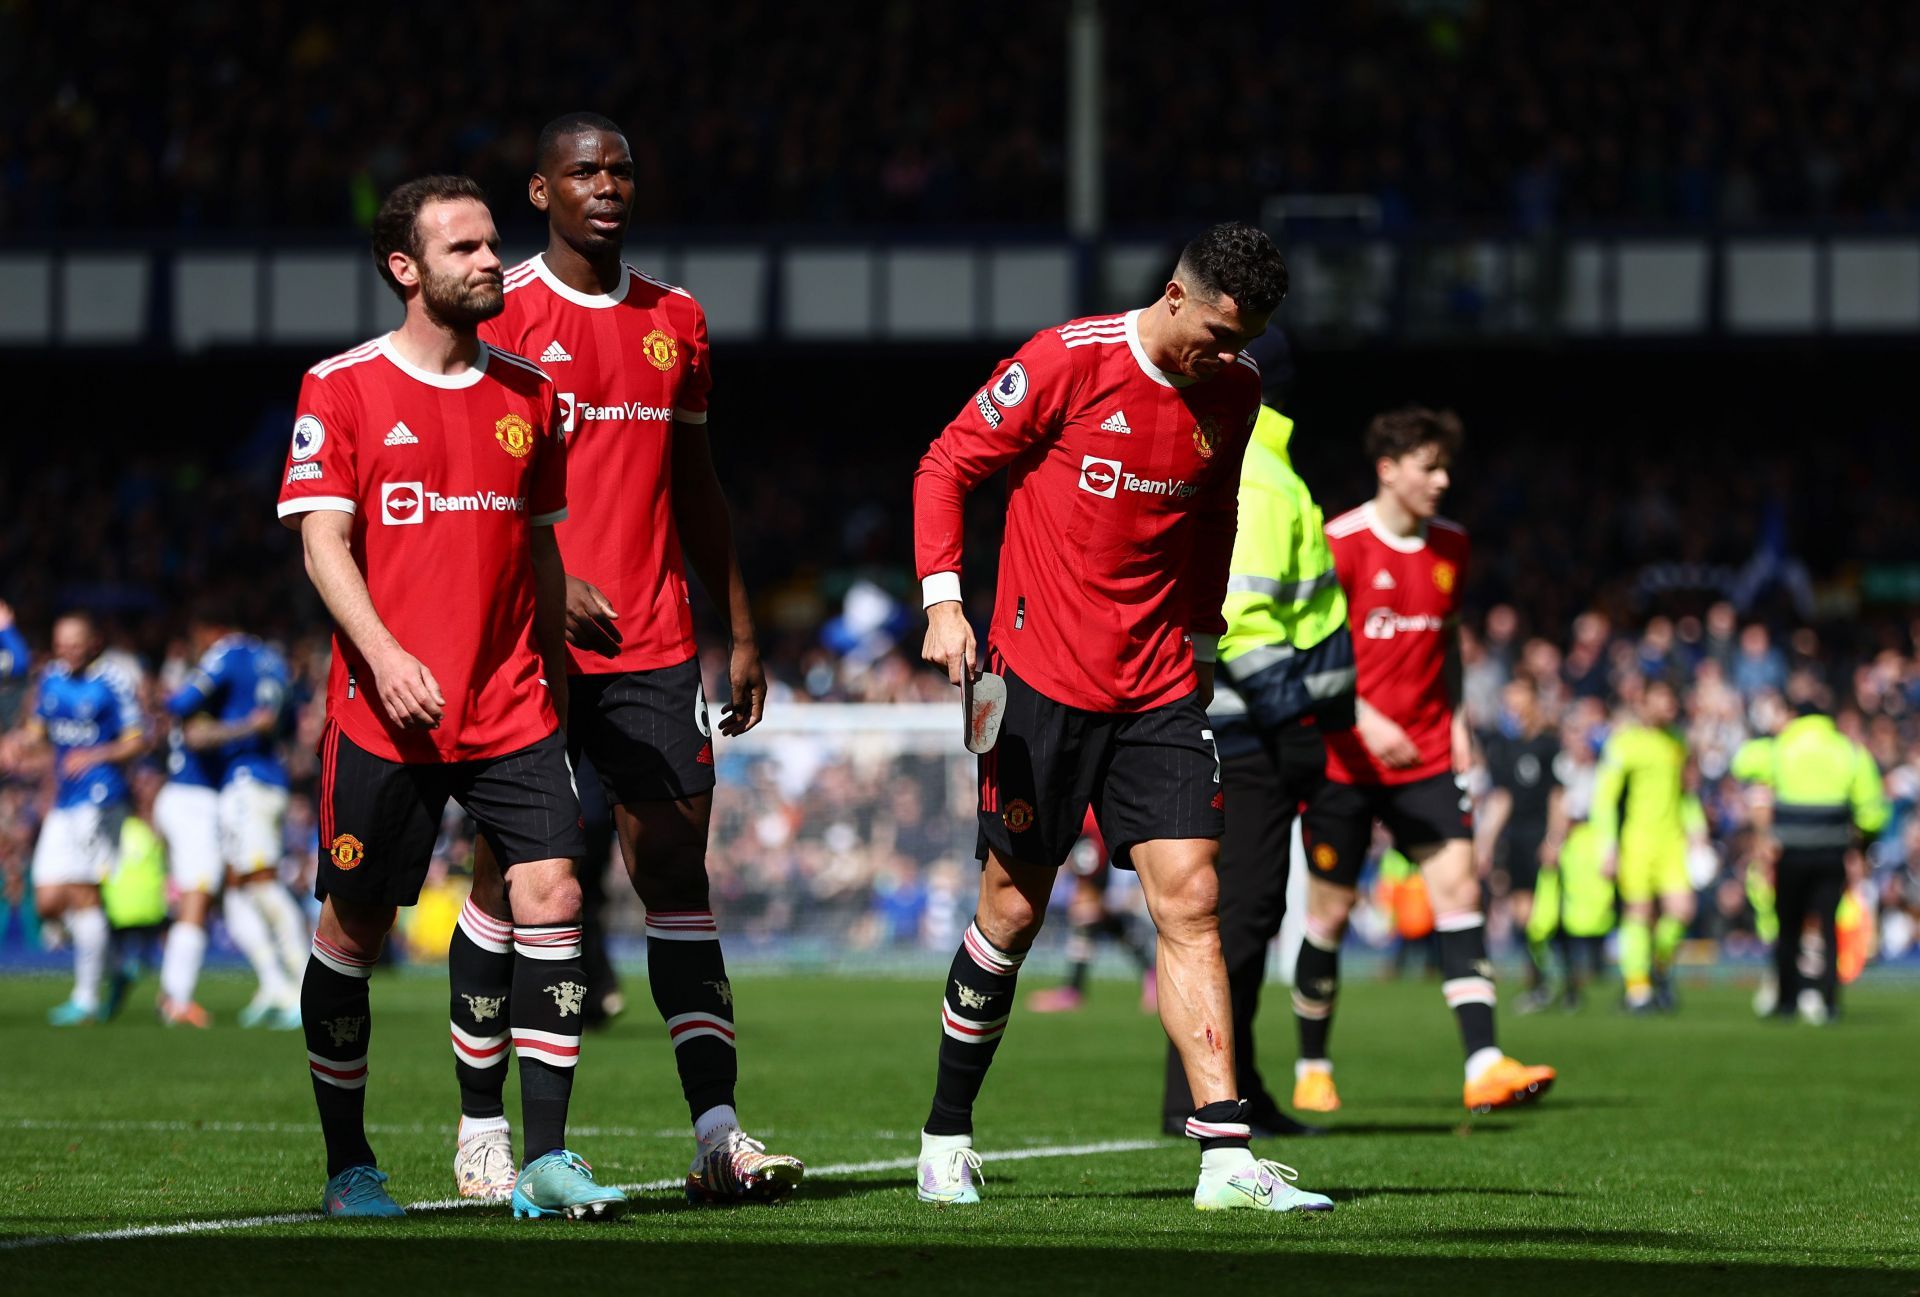 A nightmare afternoon for Manchester United at Goodison Park